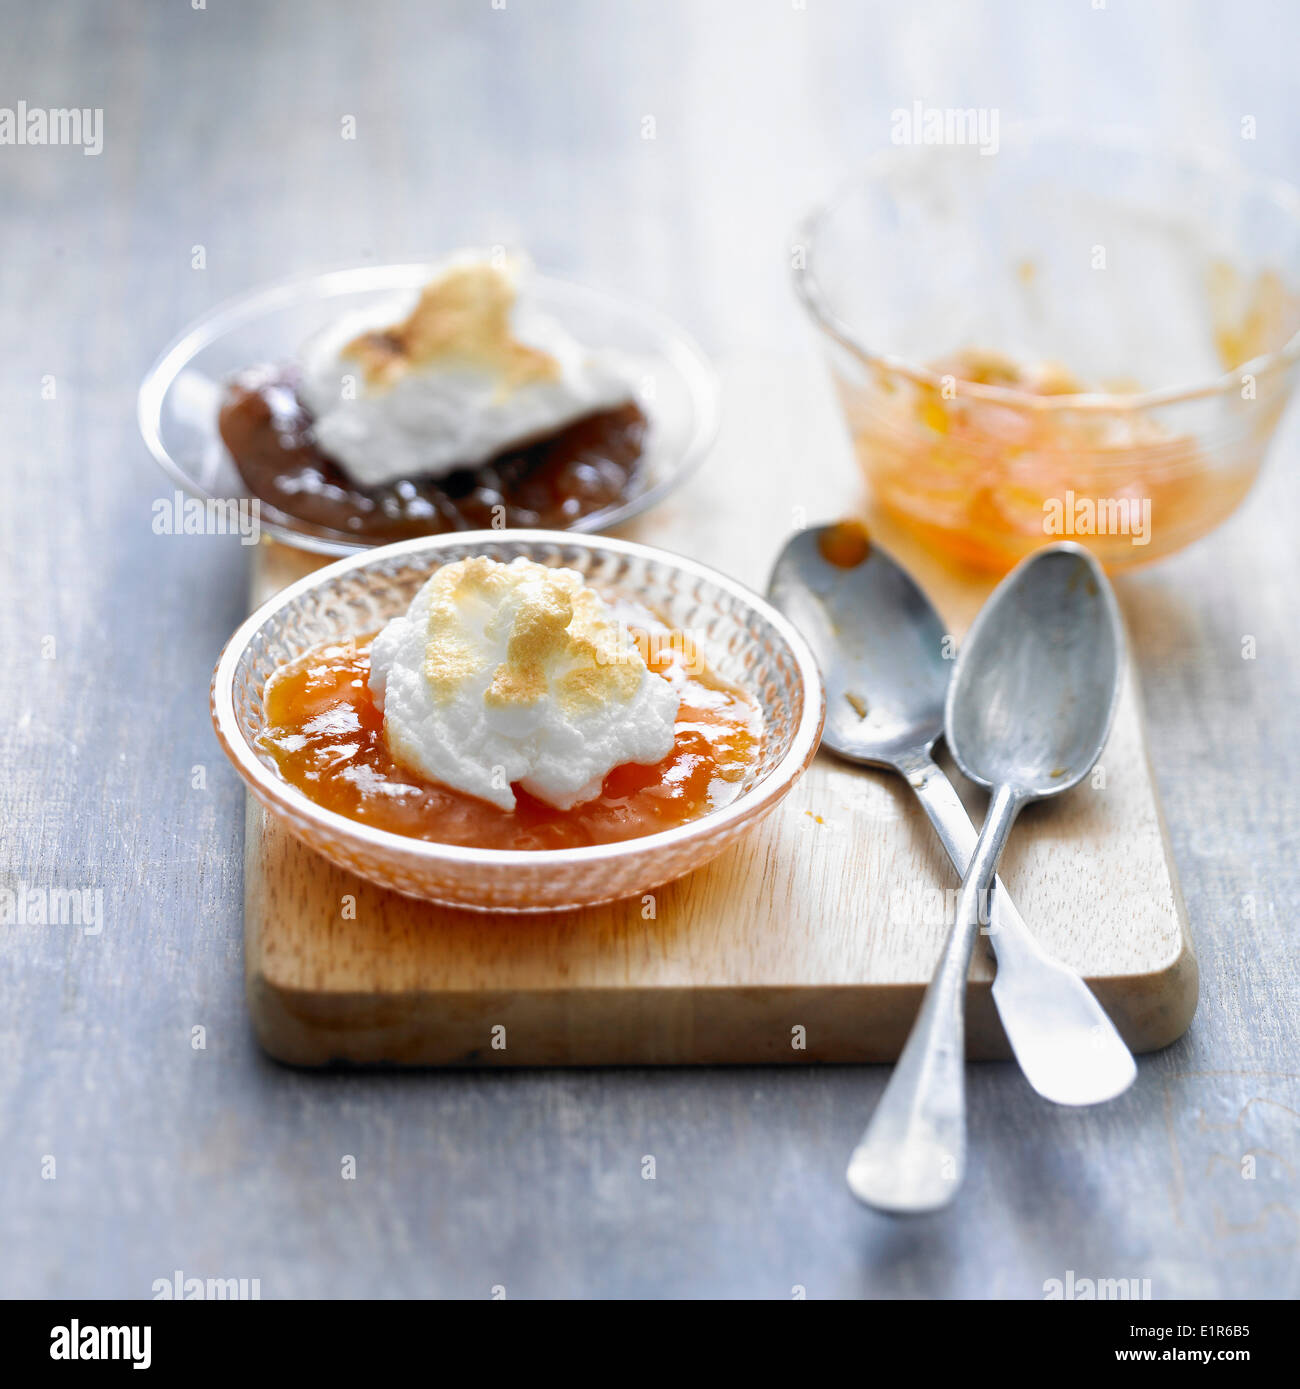 Stewed fruit with meringue topping Stock Photo